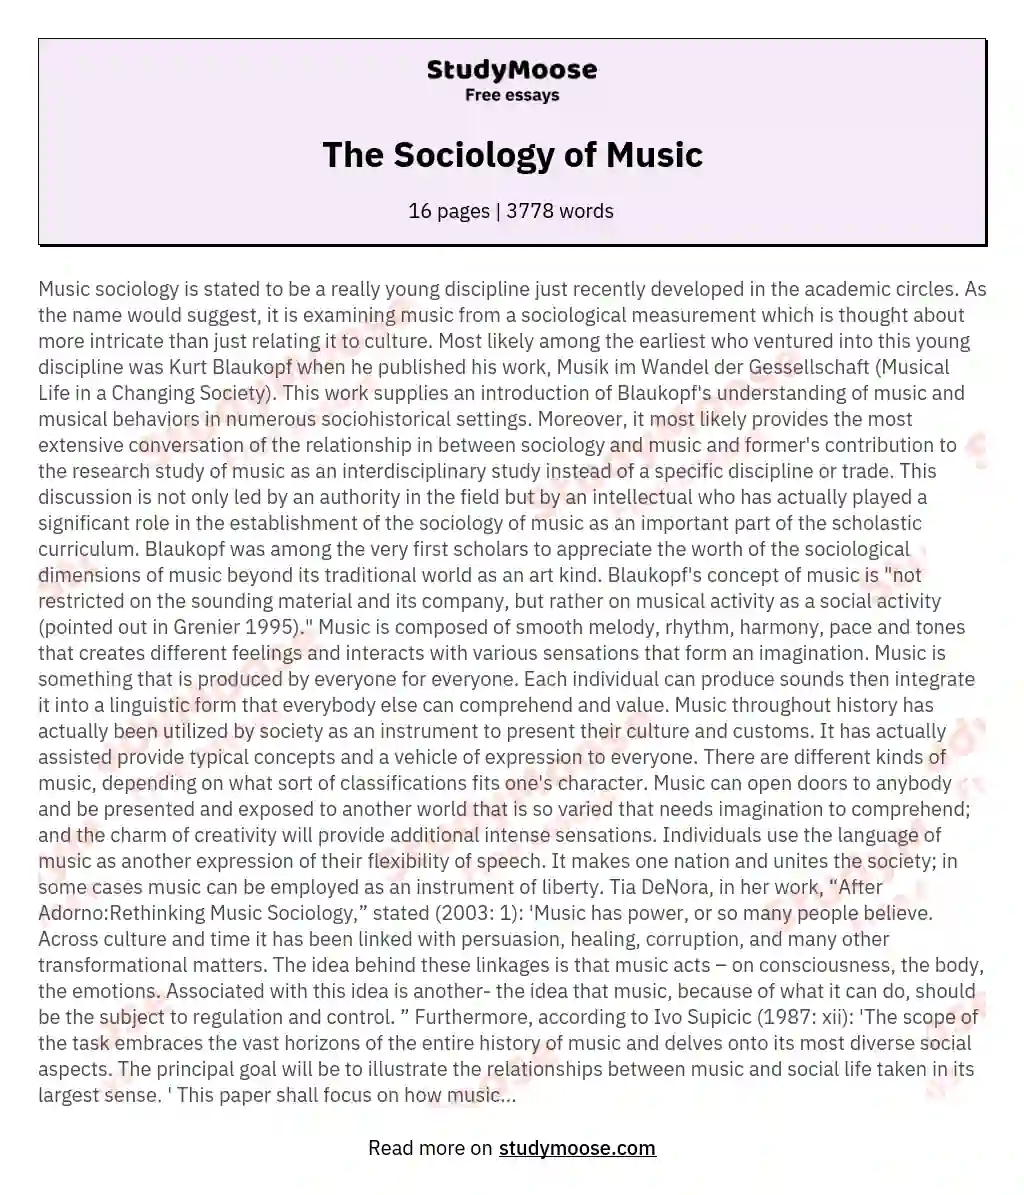 The Sociology of Music essay